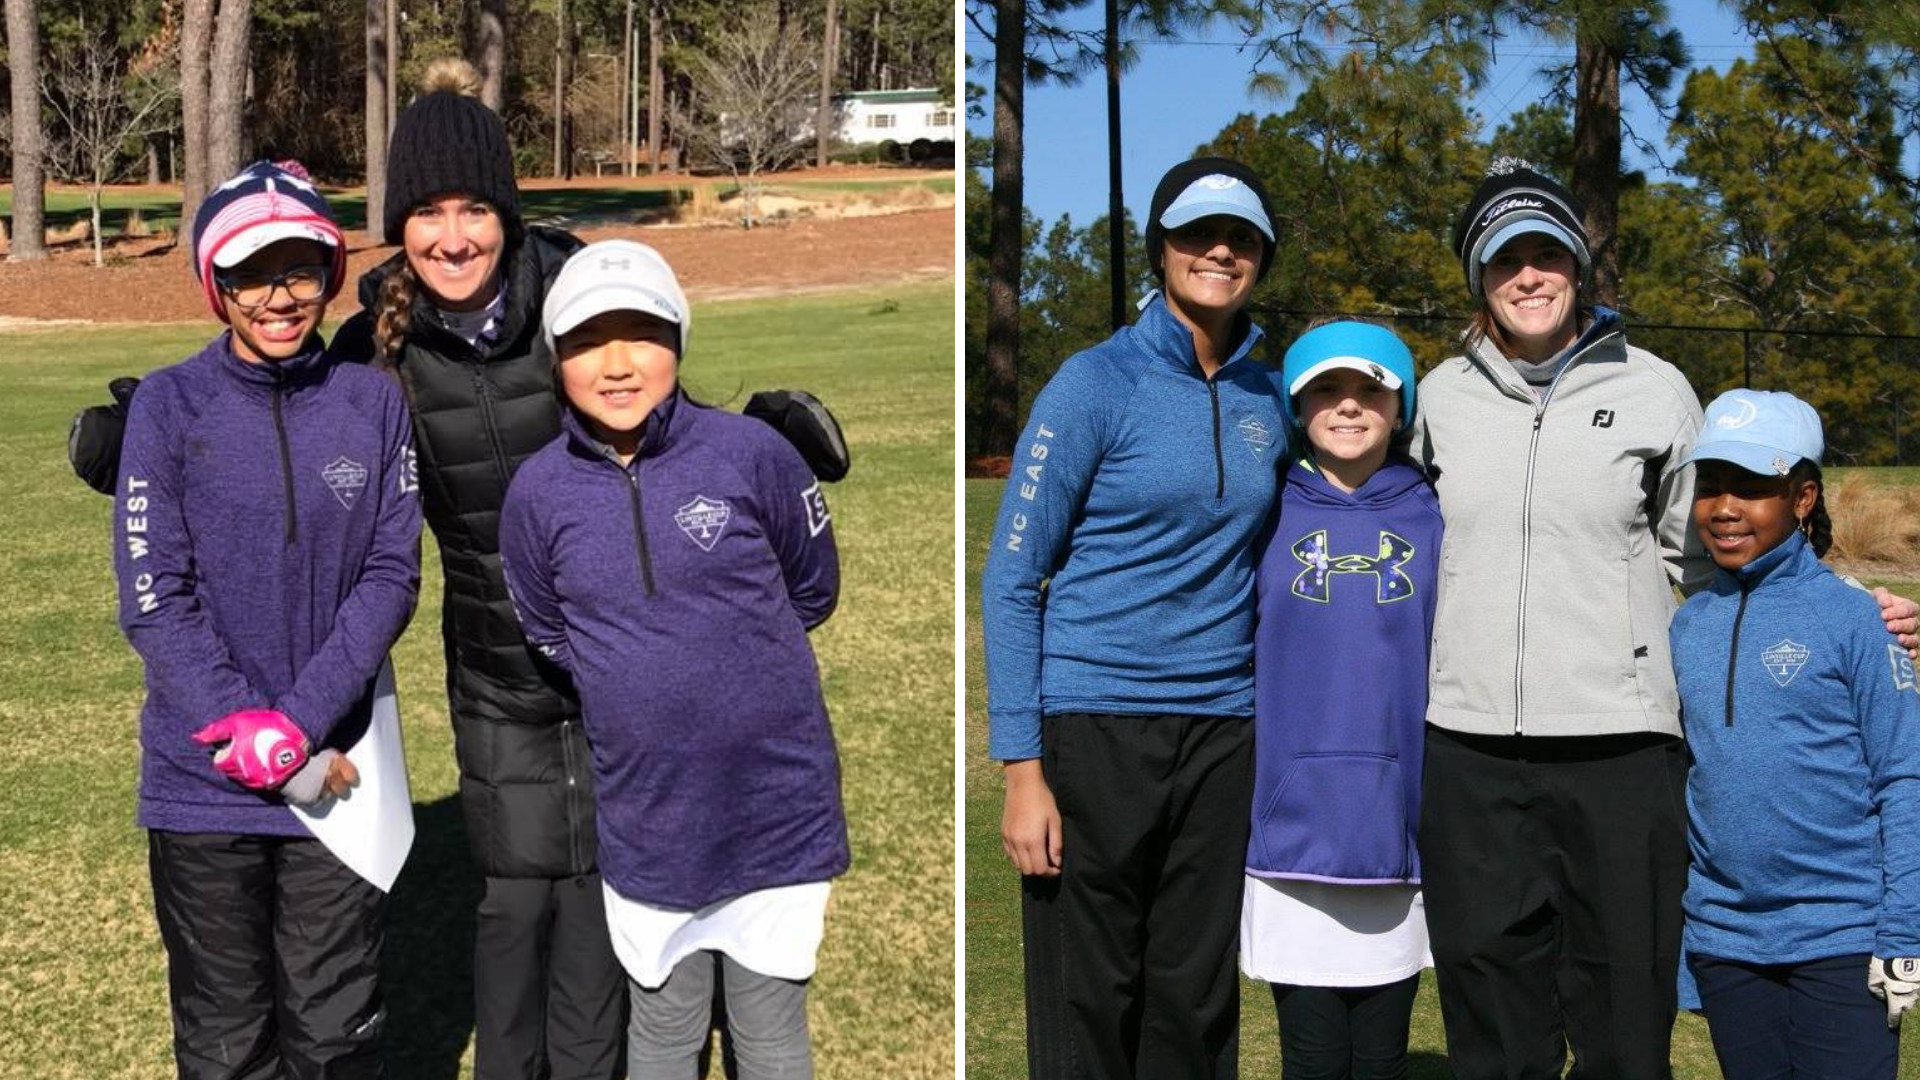 Shaping the Next Generation: LPGA and Symetra Tour Representation at the 2019 Linville Cup